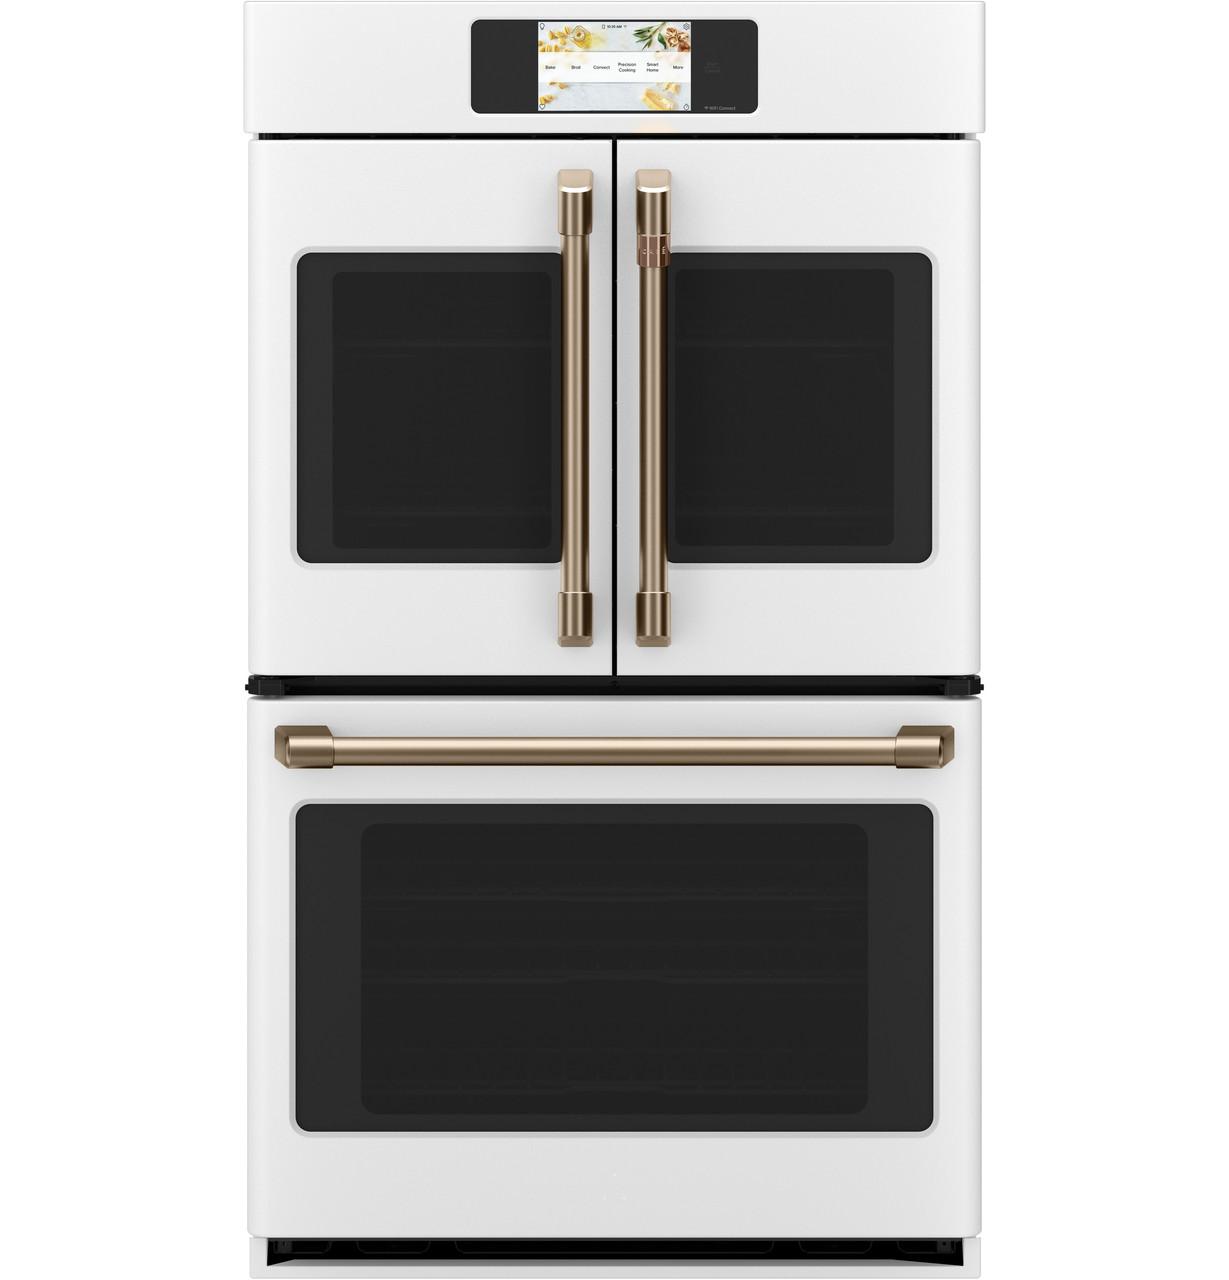 Cafe 30 inch Matte White French Door Double Wall Convection Oven (CTD90FP4NW2) - image 1 of 5